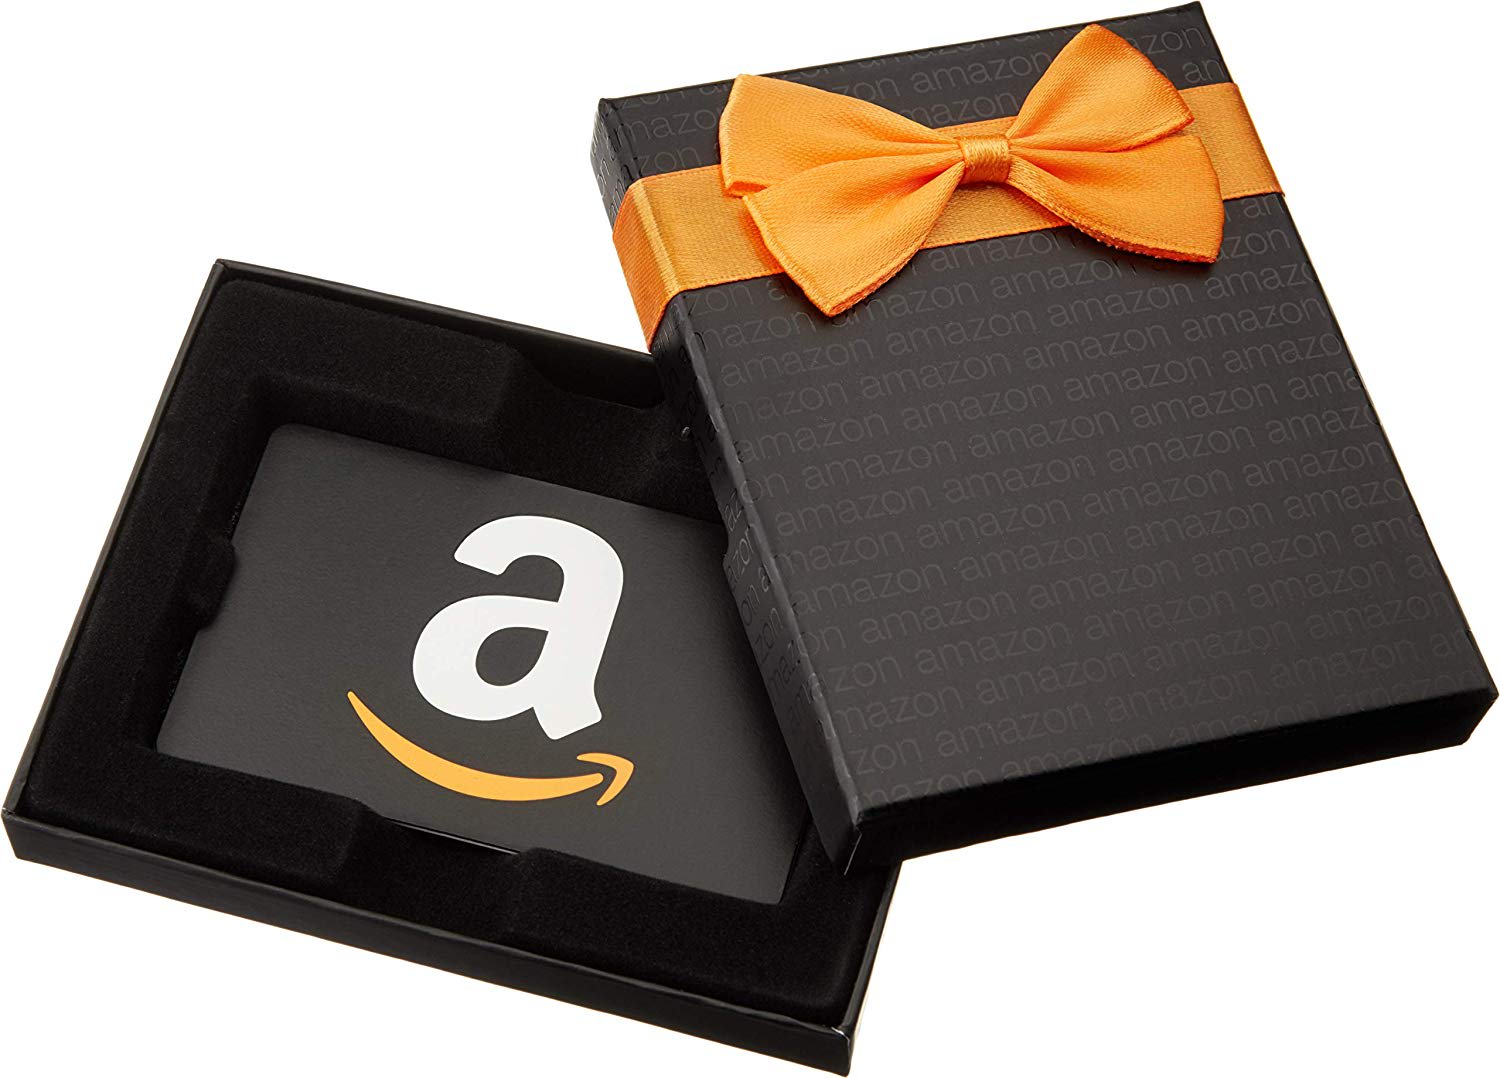 Amazon Gift Card Giveaway: Enter to Win a $50 Amazon Gift Card!